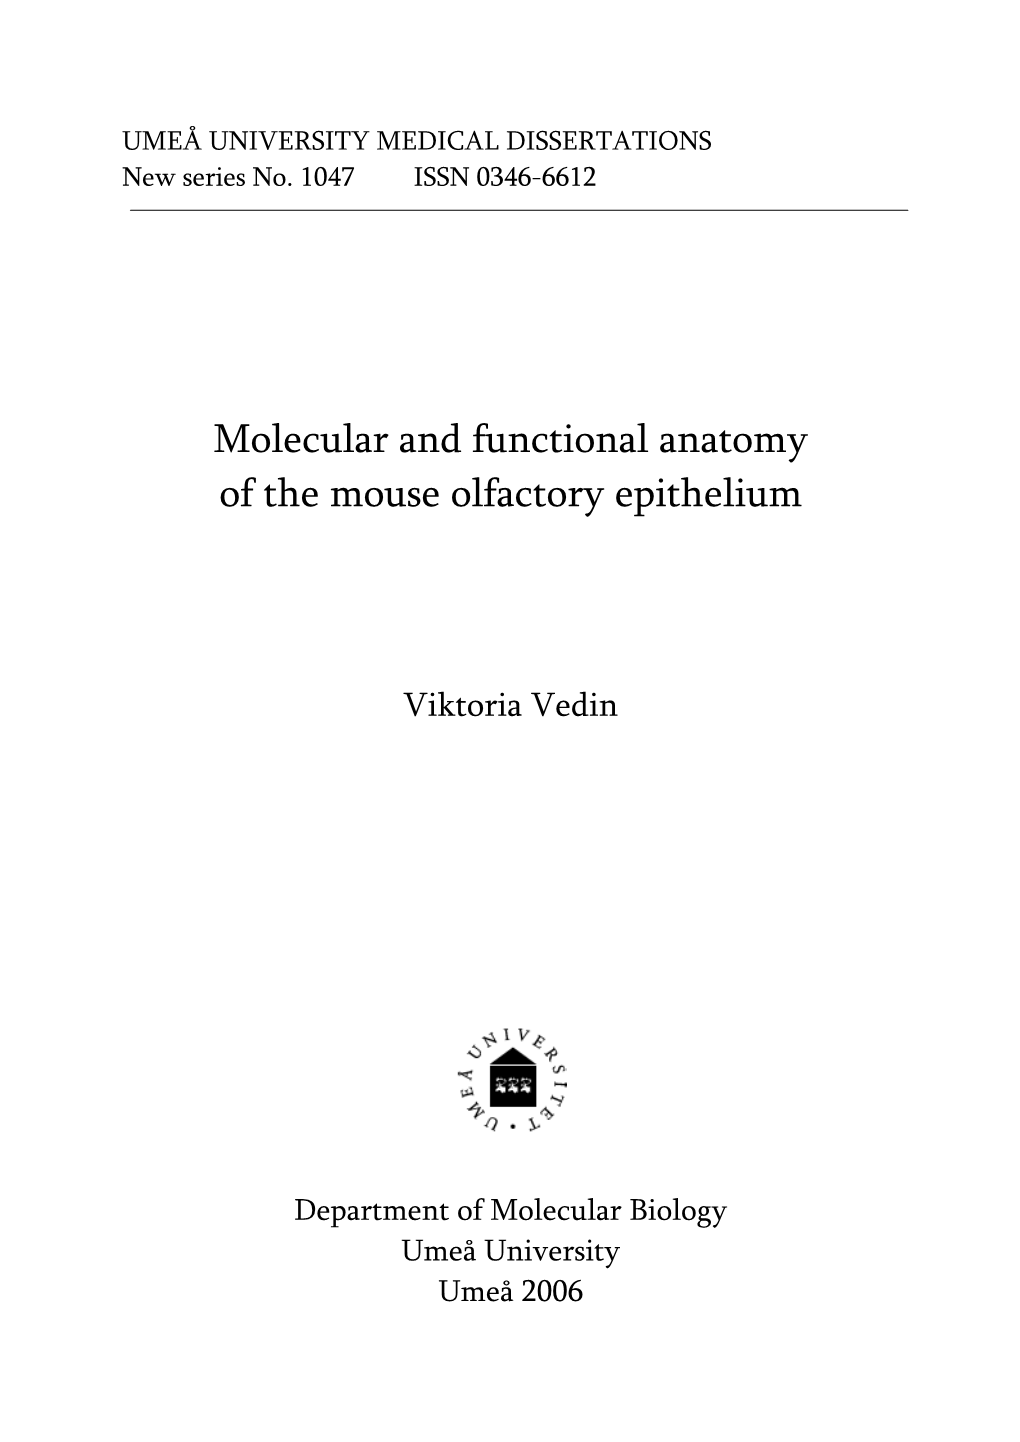 Molecular and Functional Anatomy of the Mouse Olfactory Epithelium